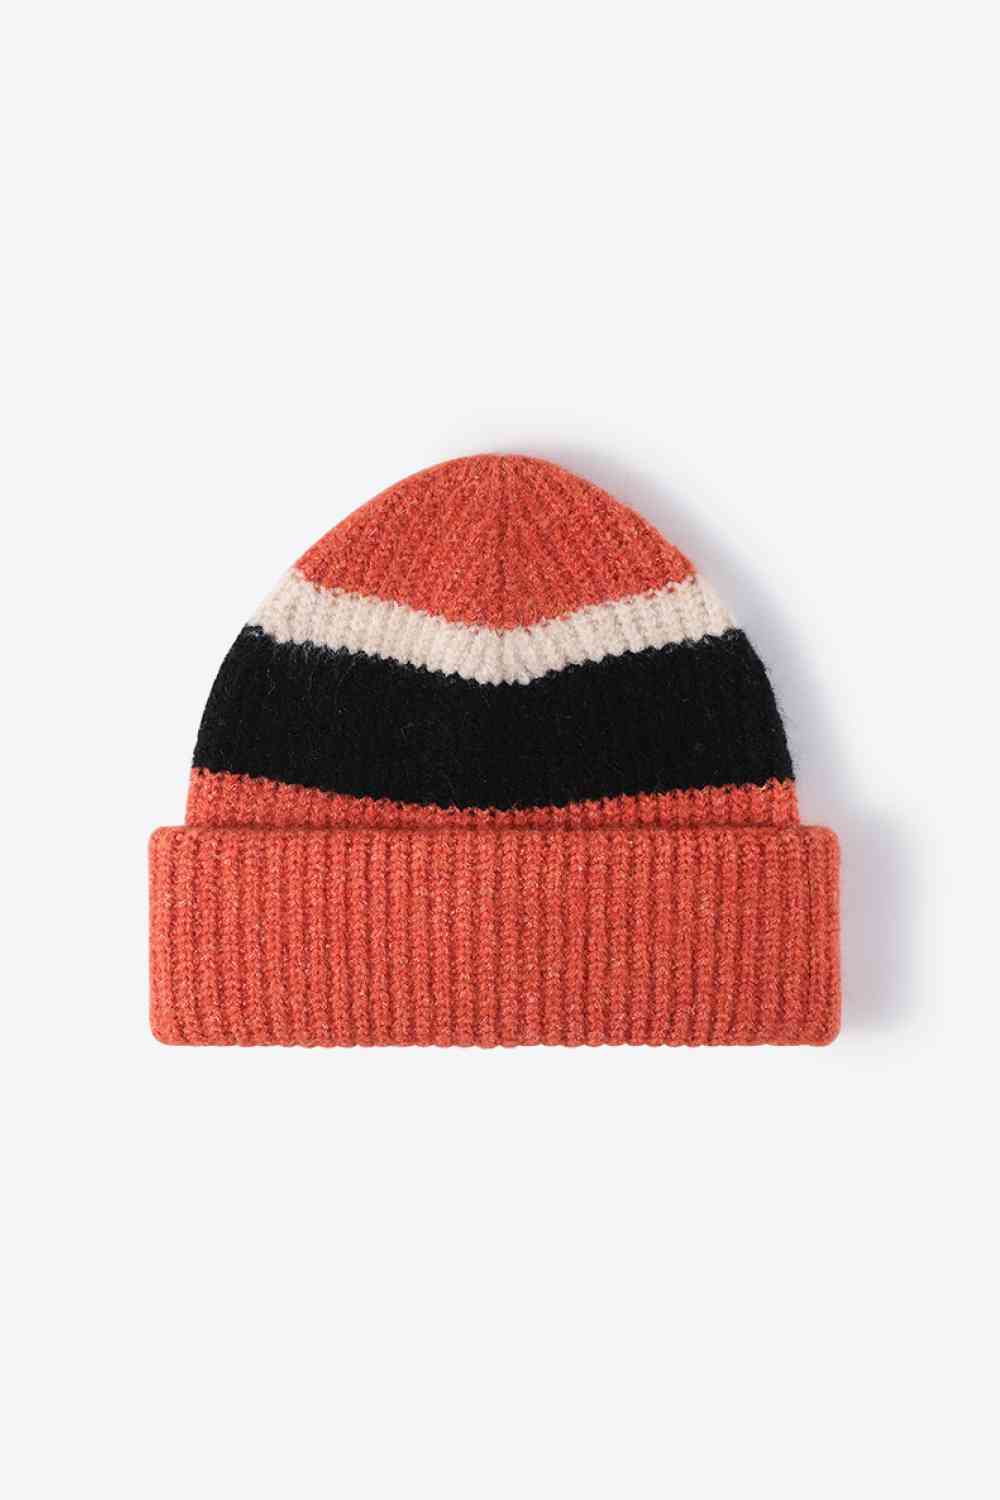 White Smoke Tricolor Cuffed Knit Beanie Sentient Beauty Fashions *Accessories